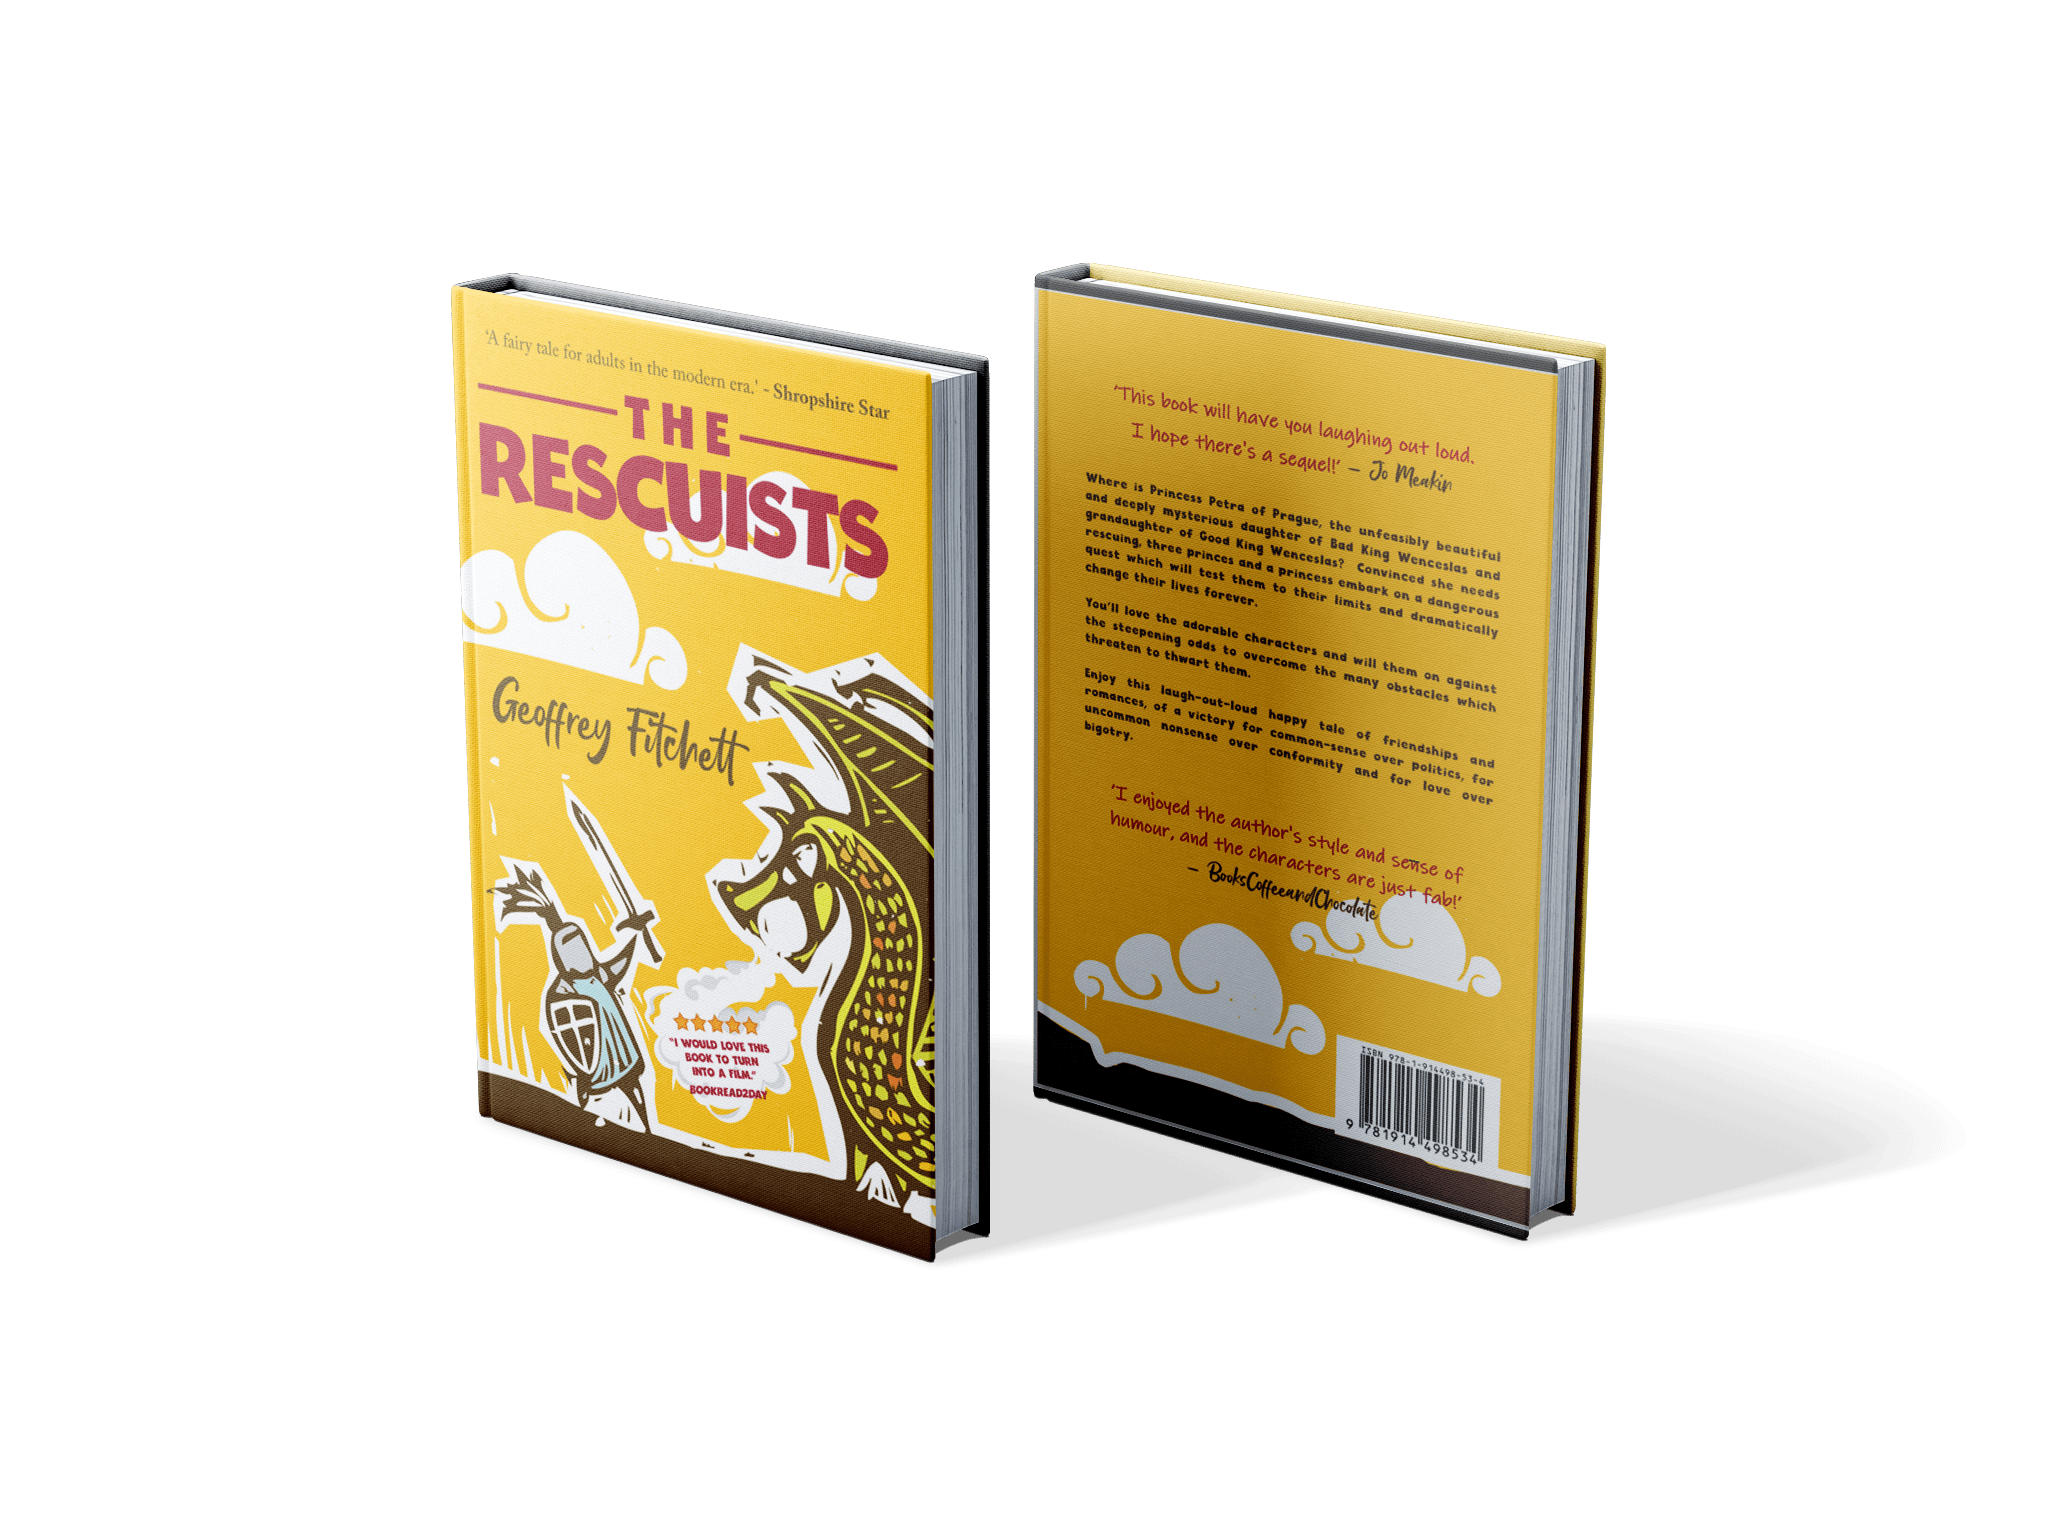 Image of Rescuists book